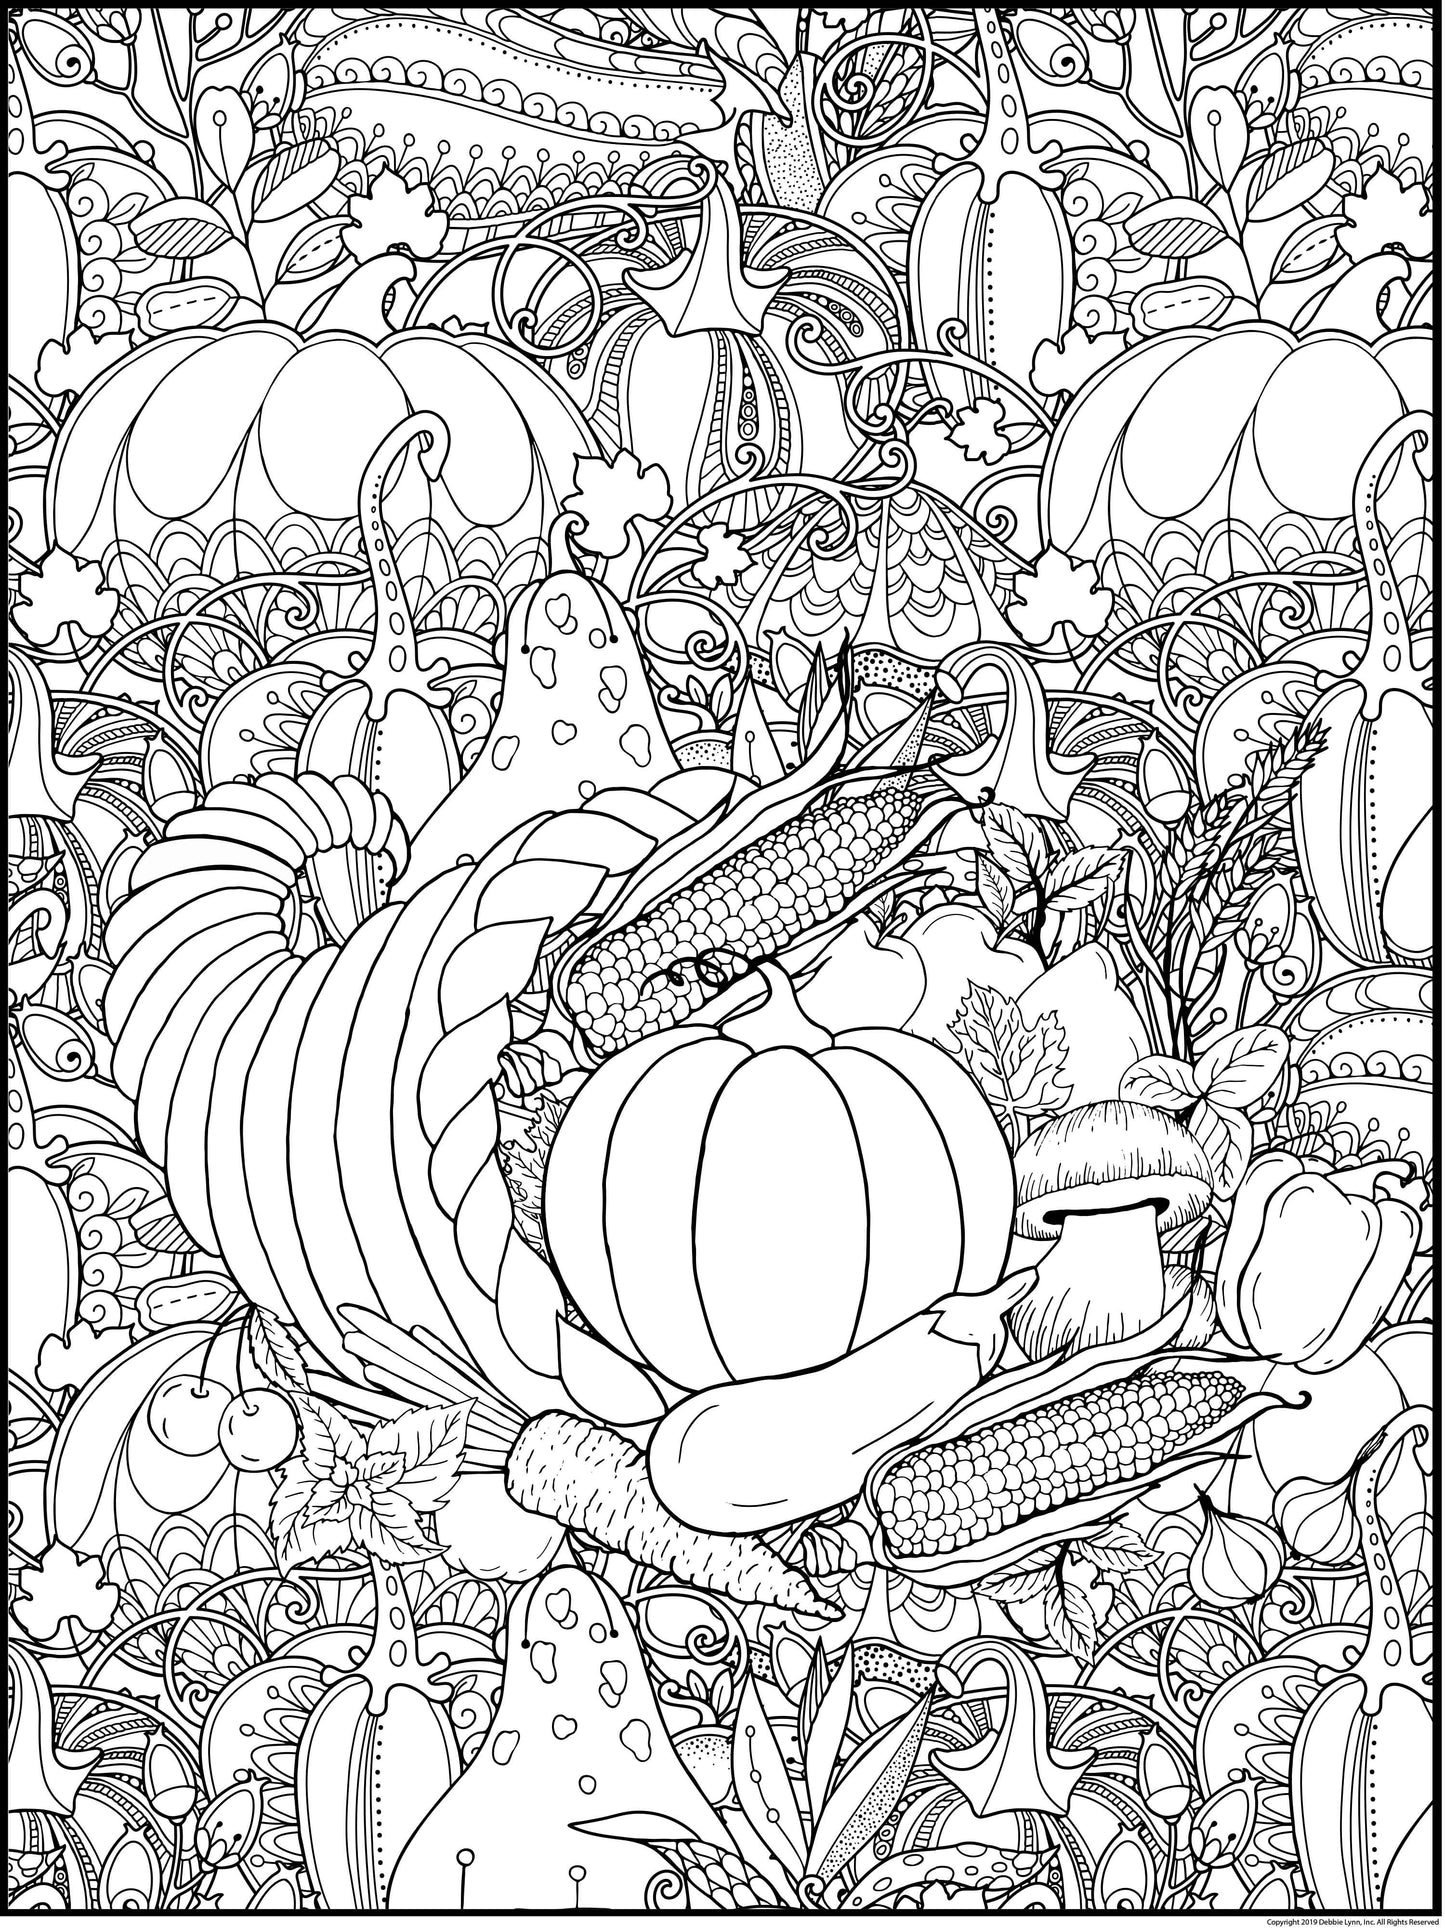 Thanksgiving Personalized Giant Coloring Poster 46"x60"